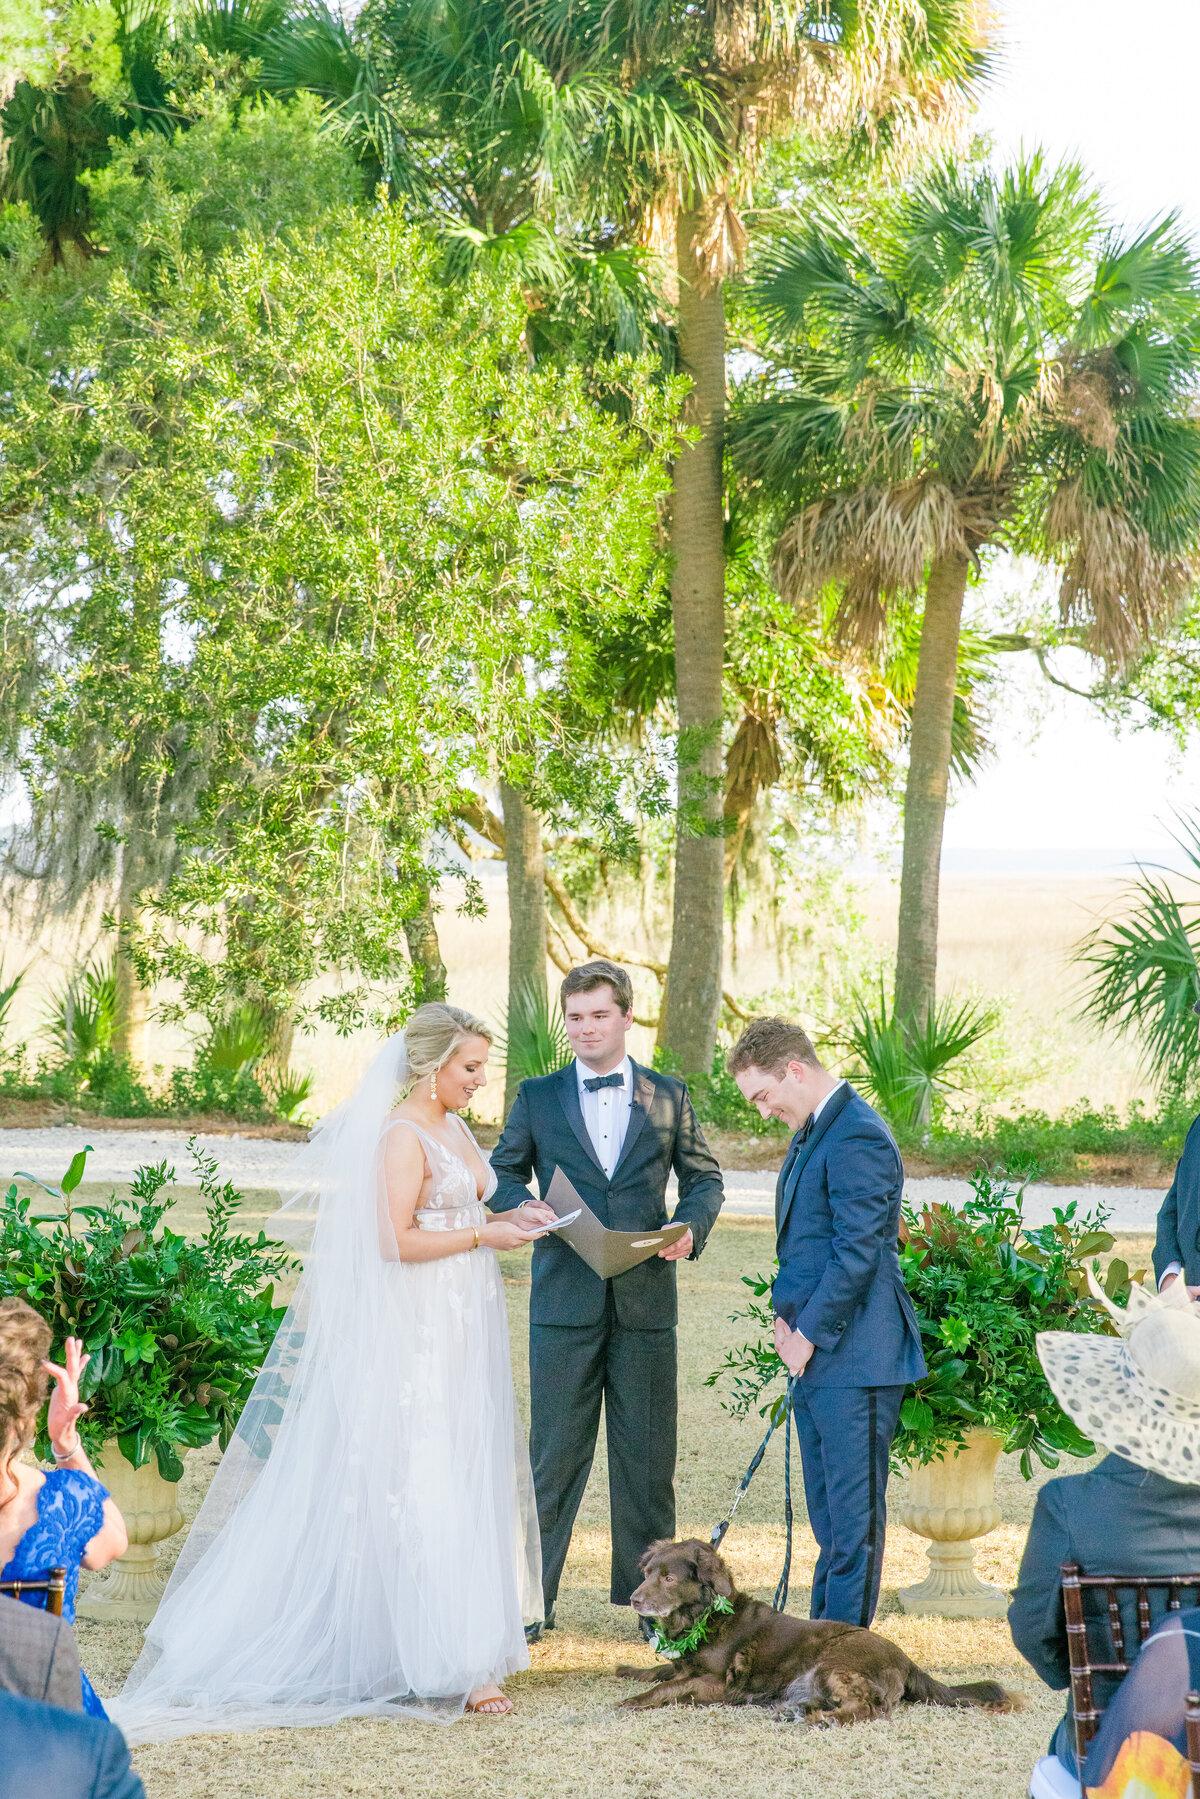 Wedding ceremony with dog at Palmetto Bluff near Charleston, South Carolina. Photographed by destination and Charleston wedding photographer Dana Cubbage.